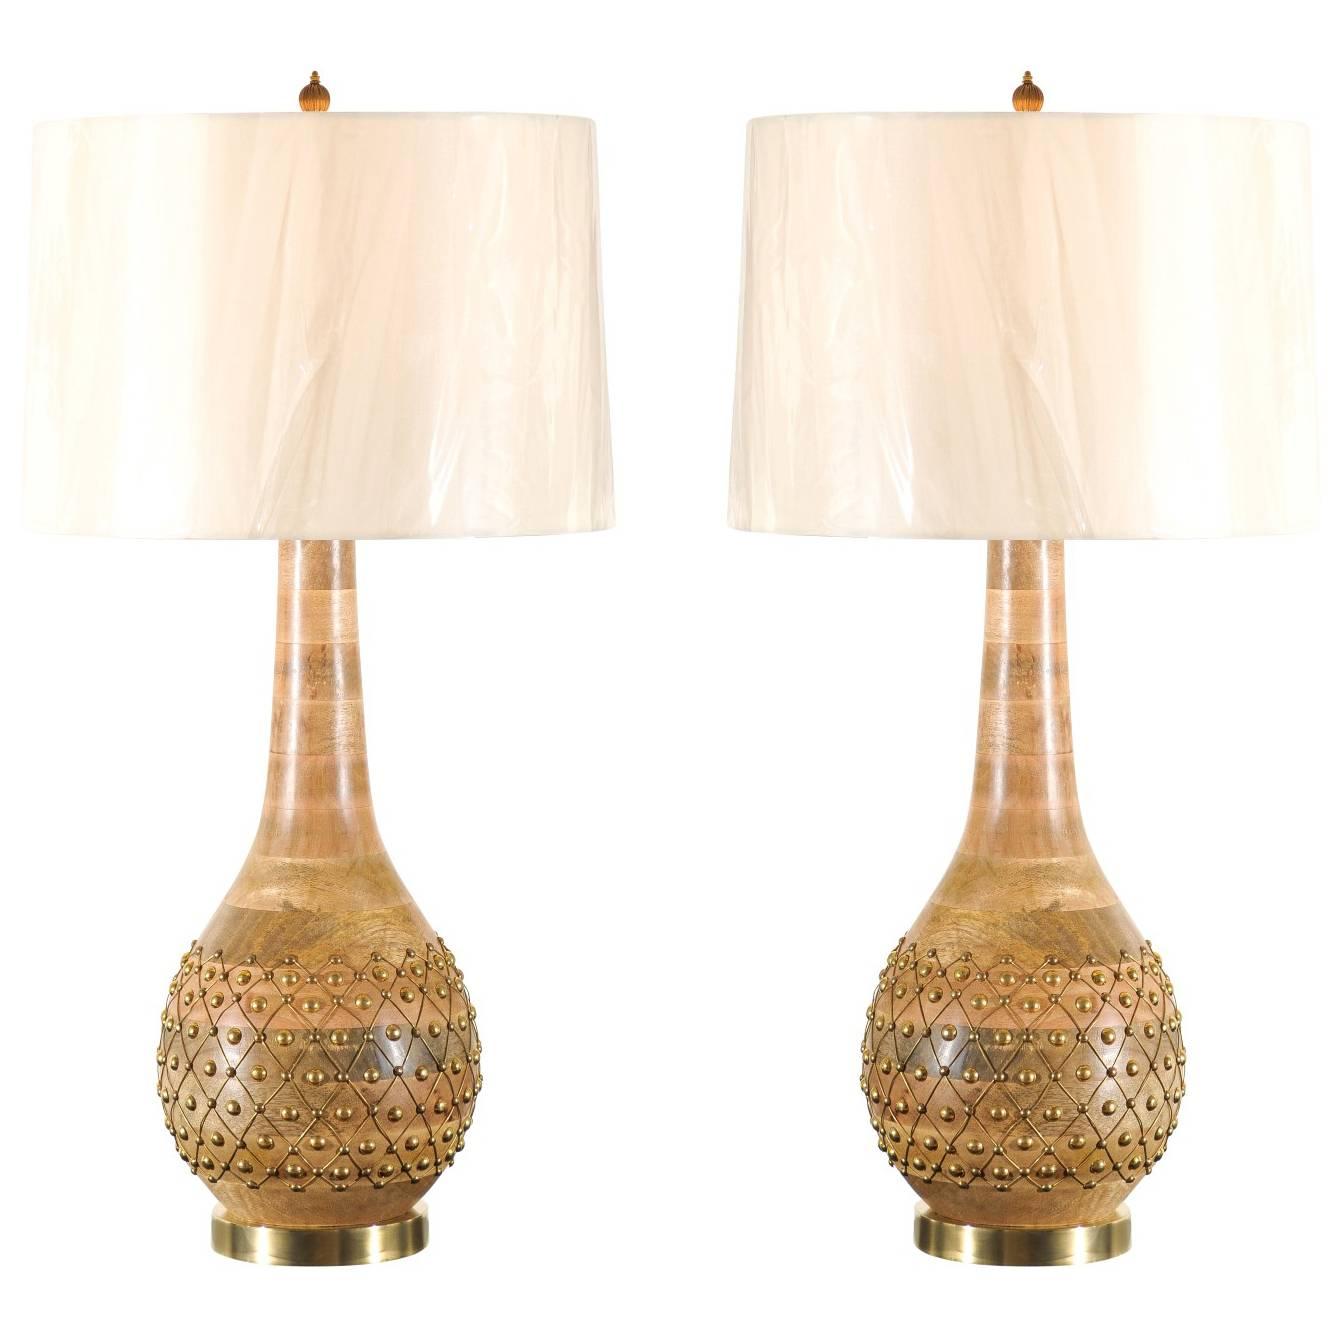 Exquisite Pair of Handmade Brass Studded Gourd Vessels as Custom Lamps